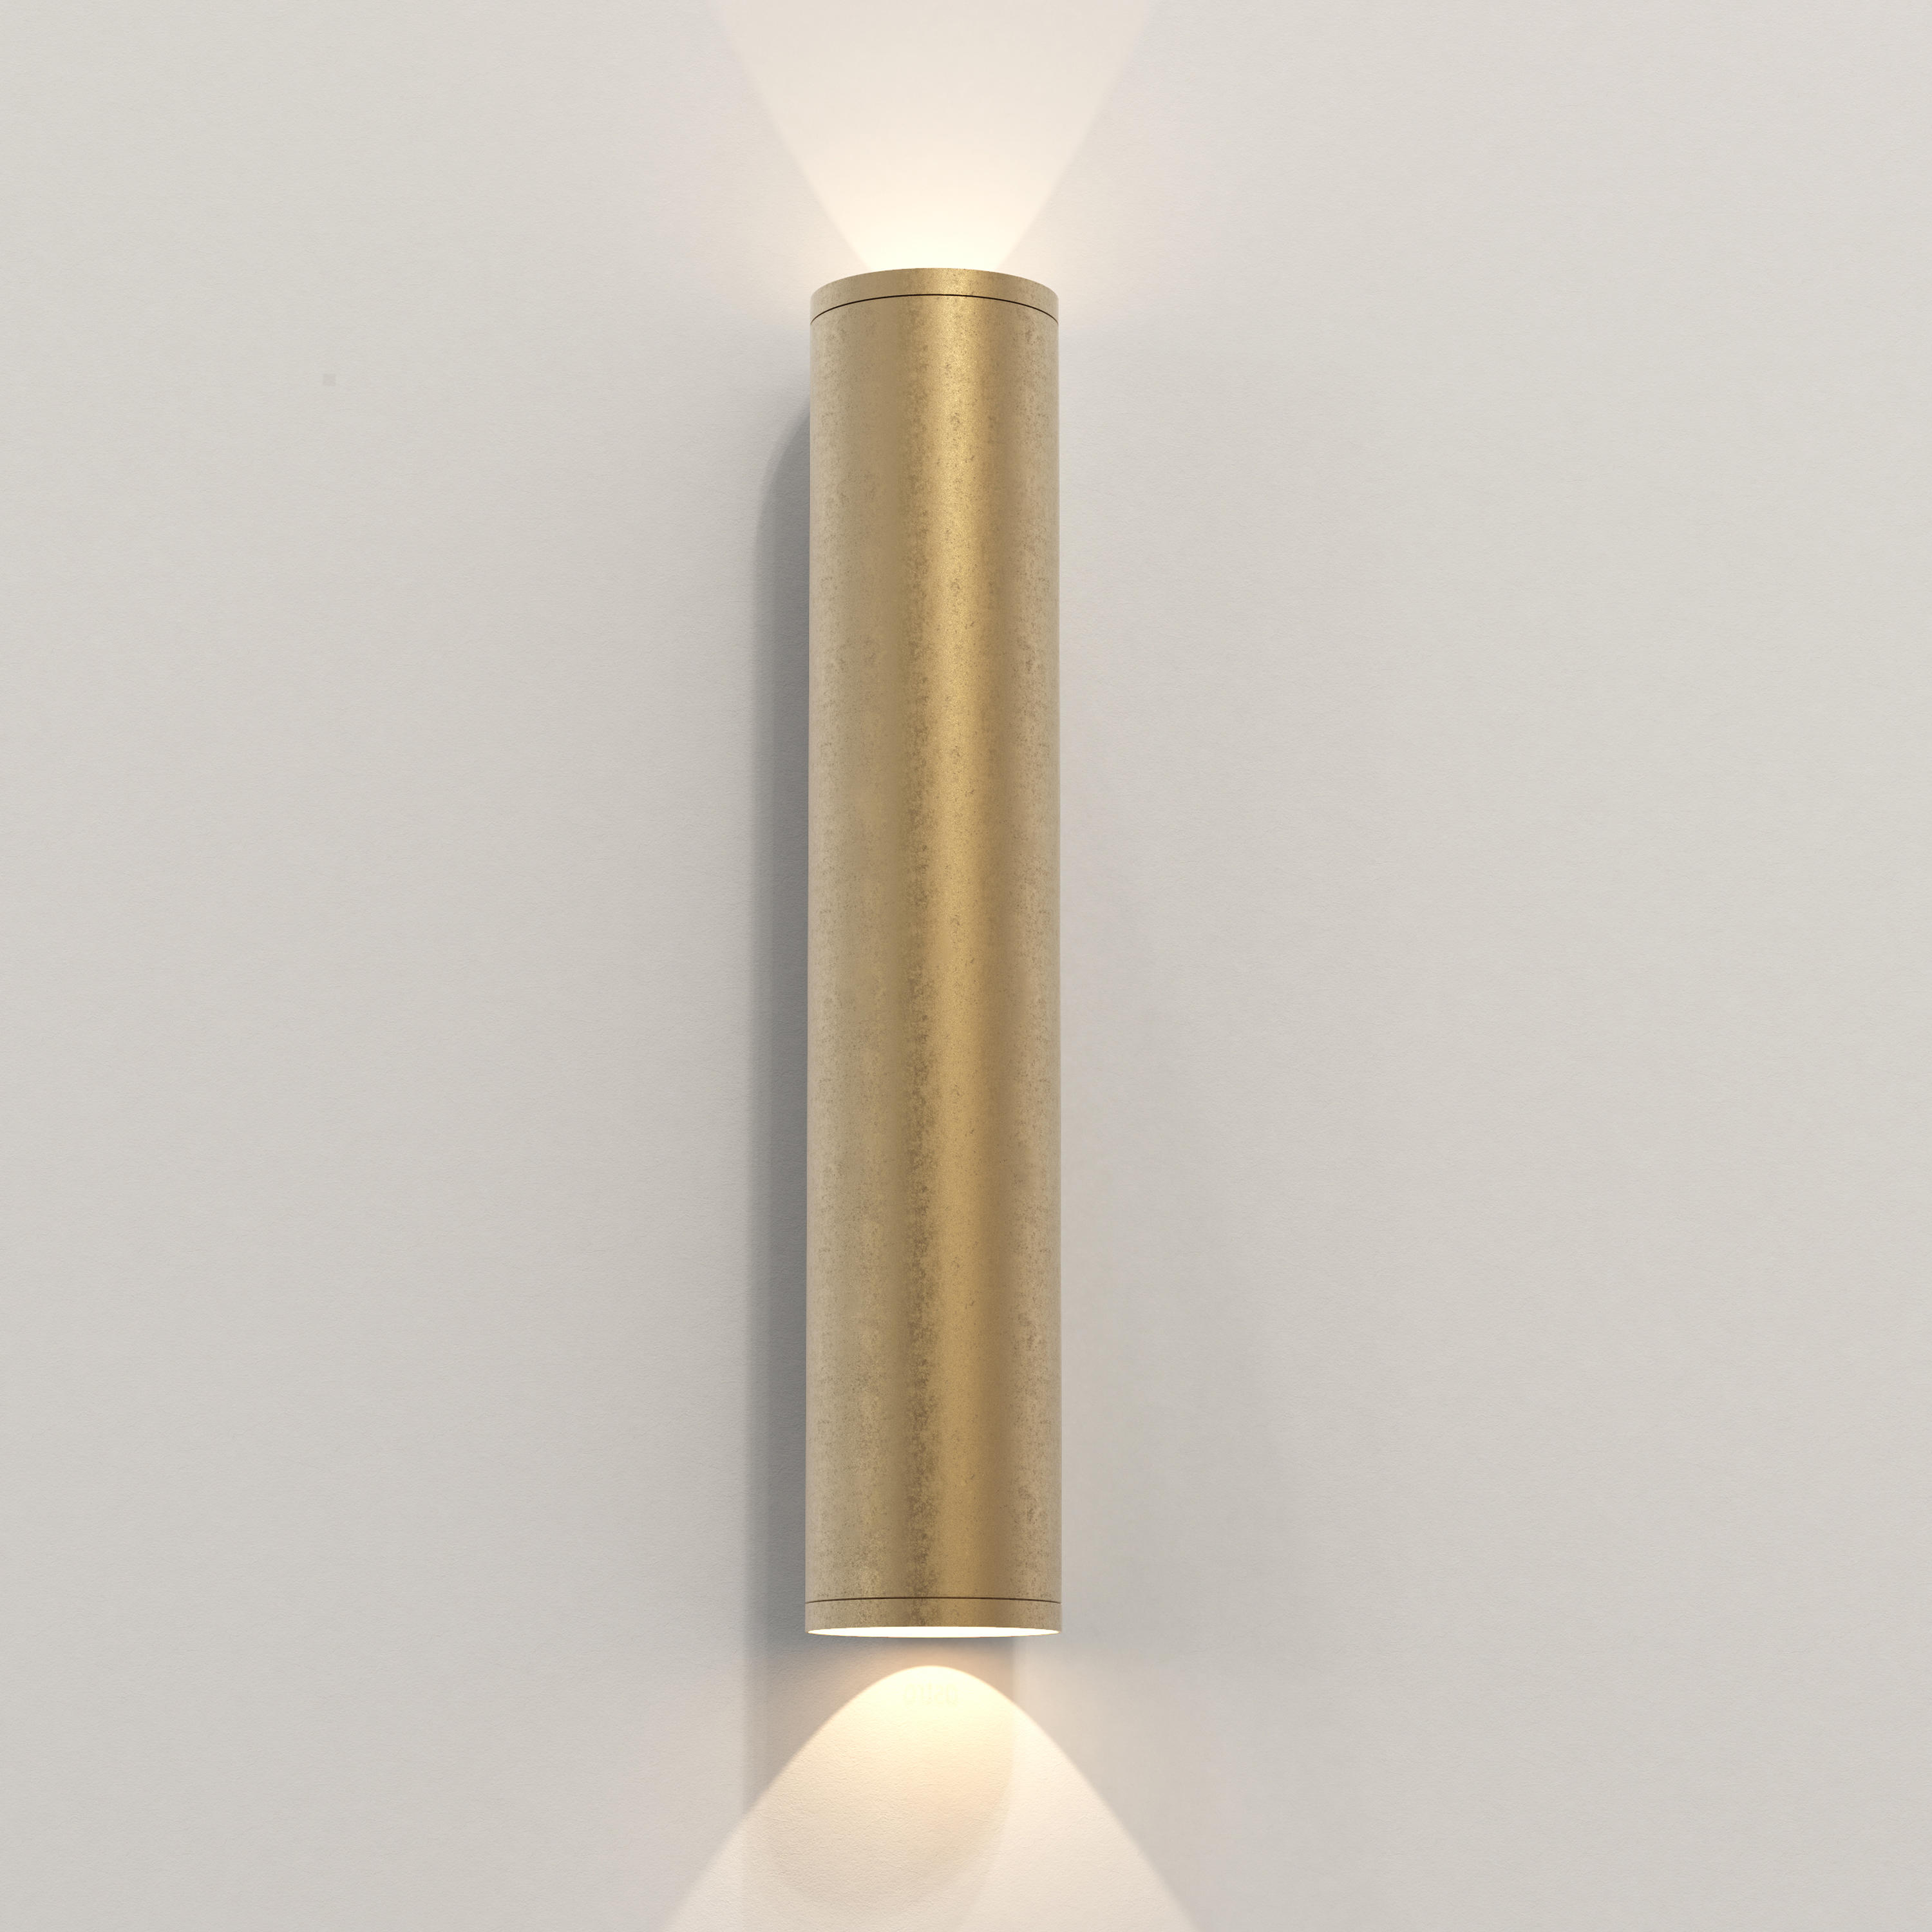 Bruce Solid Brass Outdoor Up or Down Wall Light, Brass